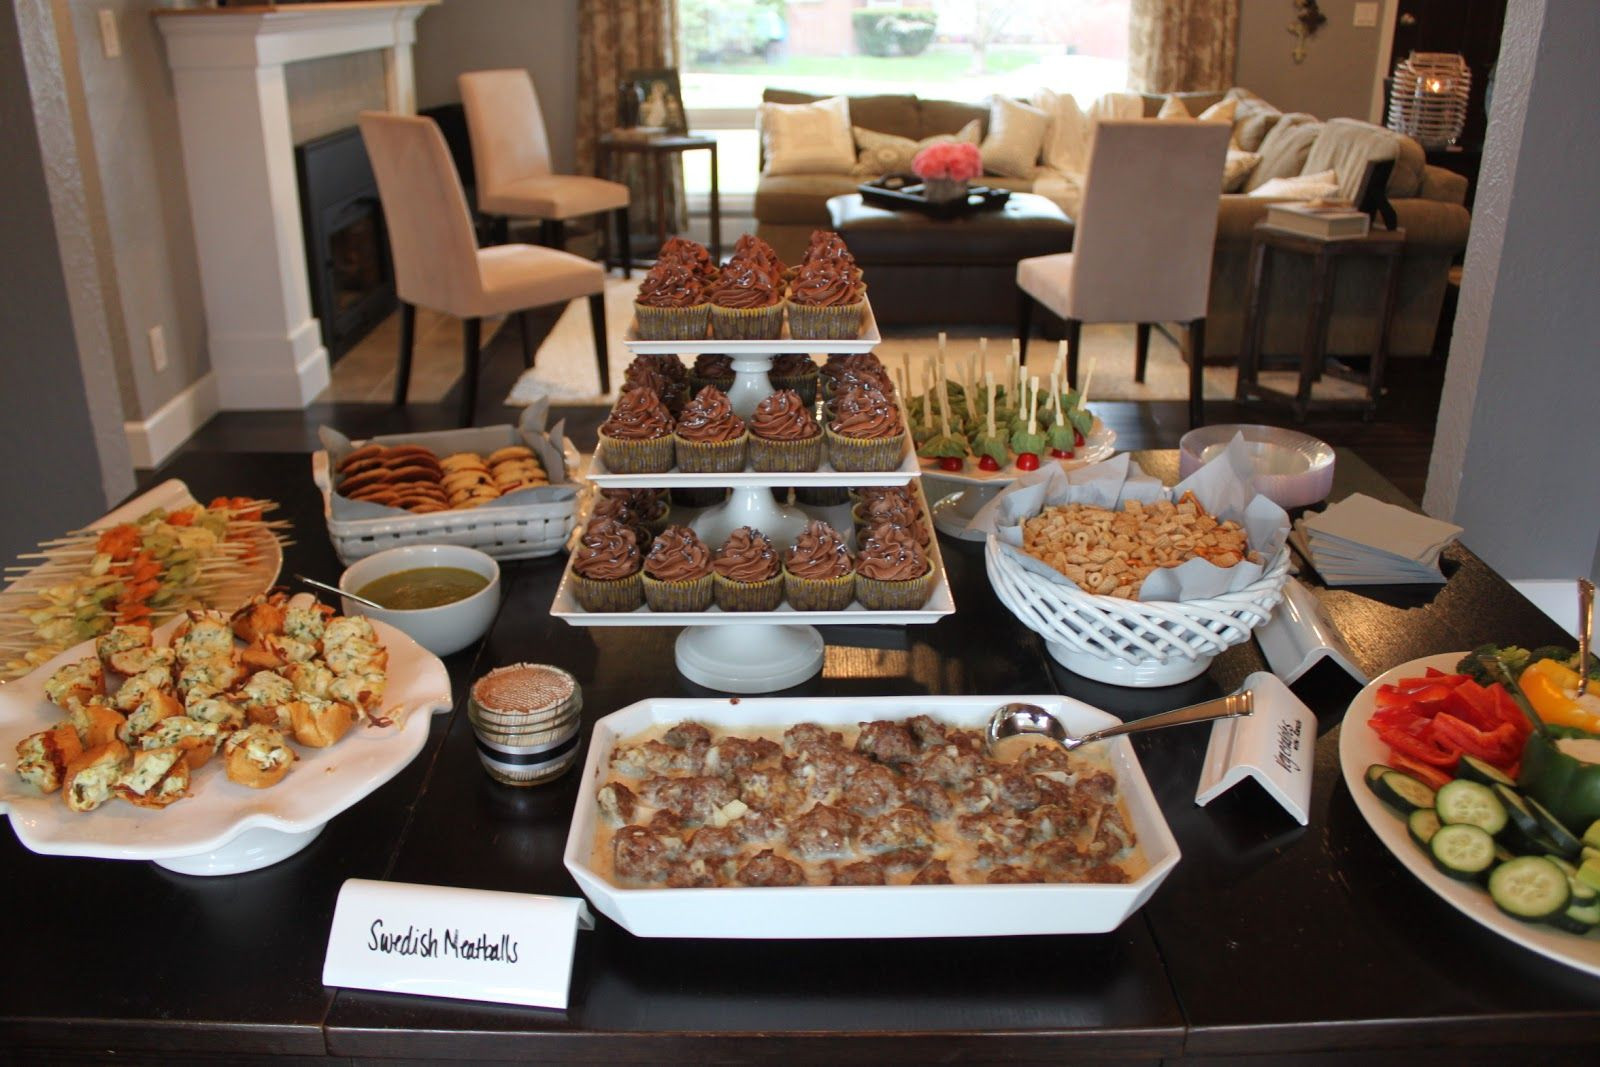 House Party Food Ideas
 A great idea for food for your own housewarming party